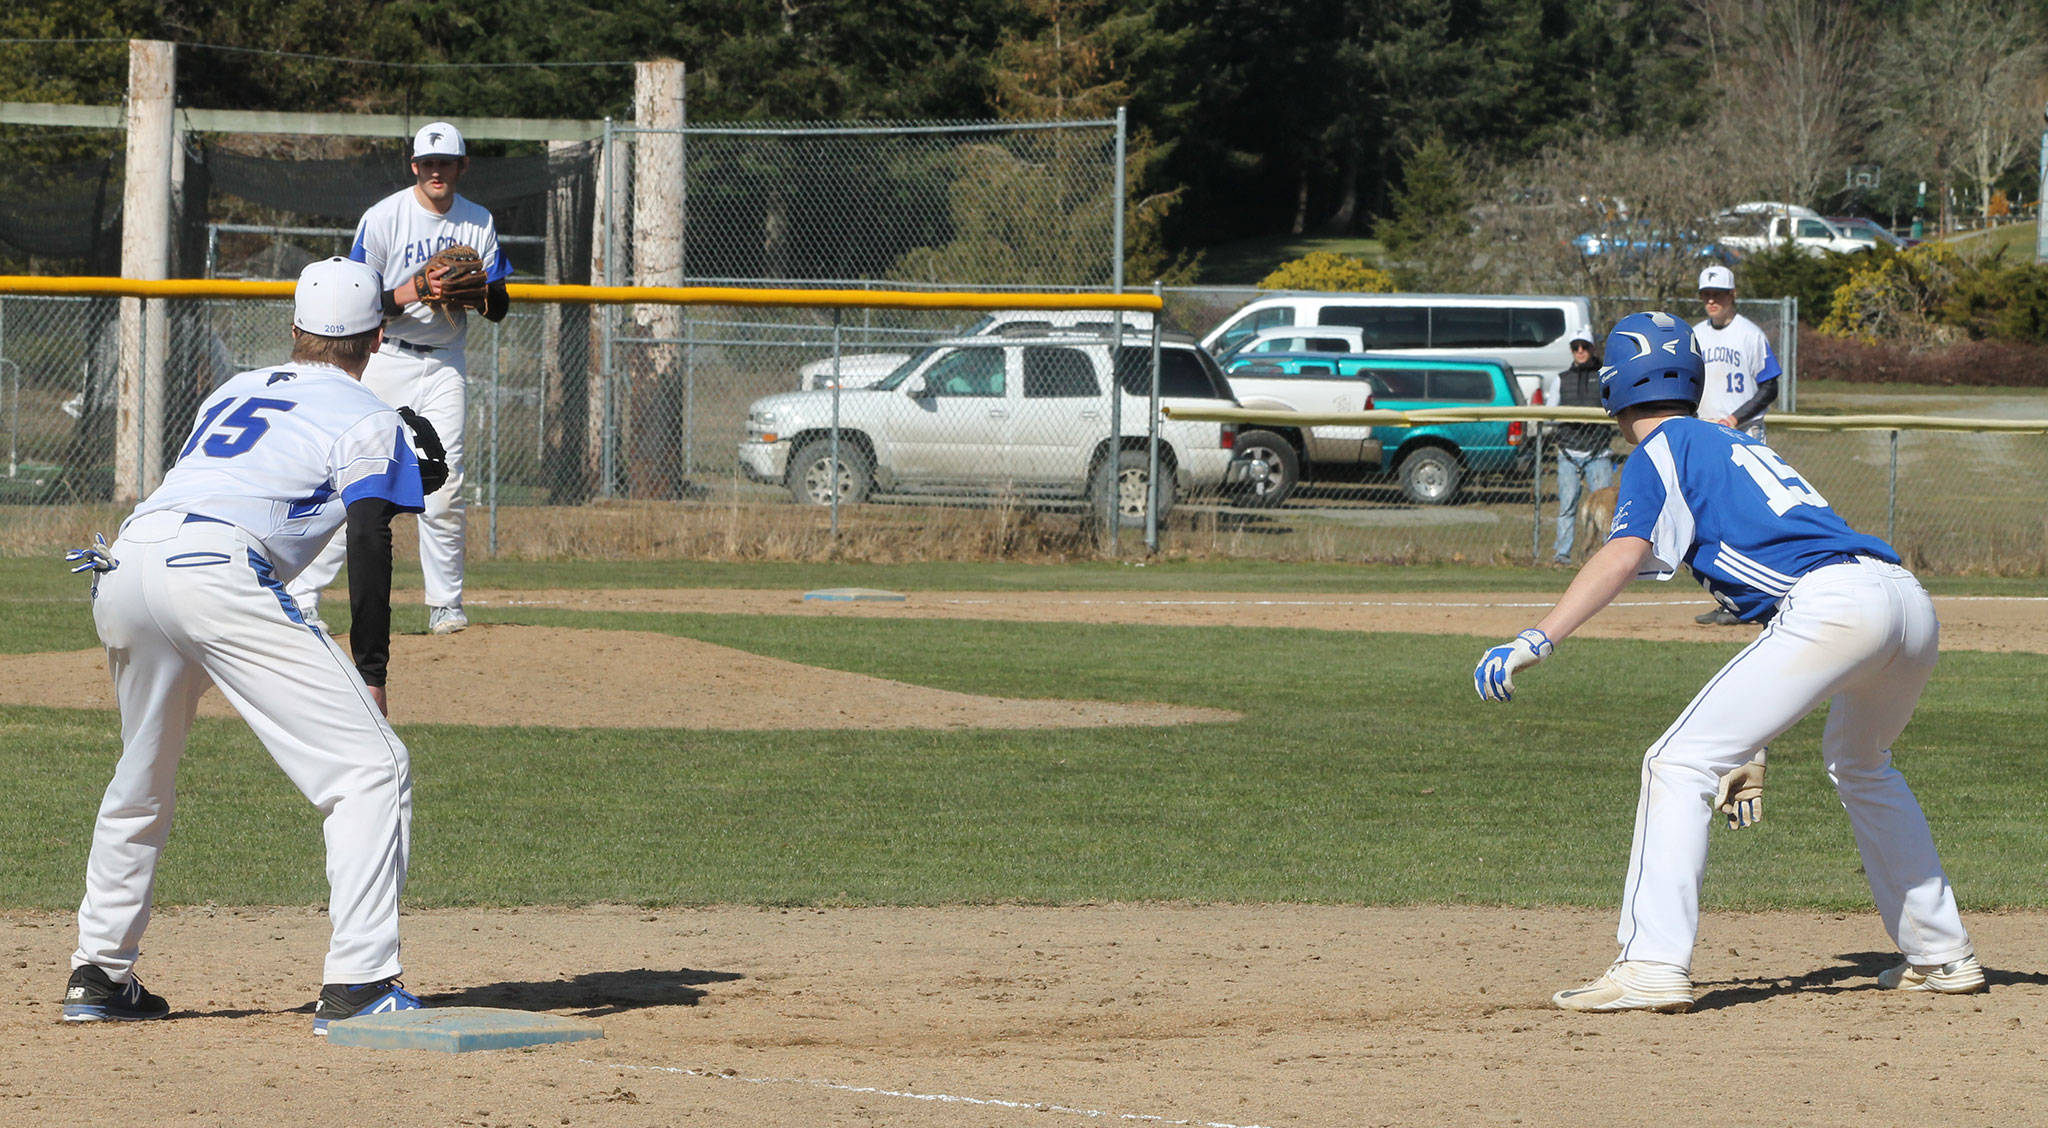 Pitcher Brent Batchelor and first baseman Nick Young hold the Chimacum baserunner close.(Photo by Jim Waller/Sound Whidbey Record)